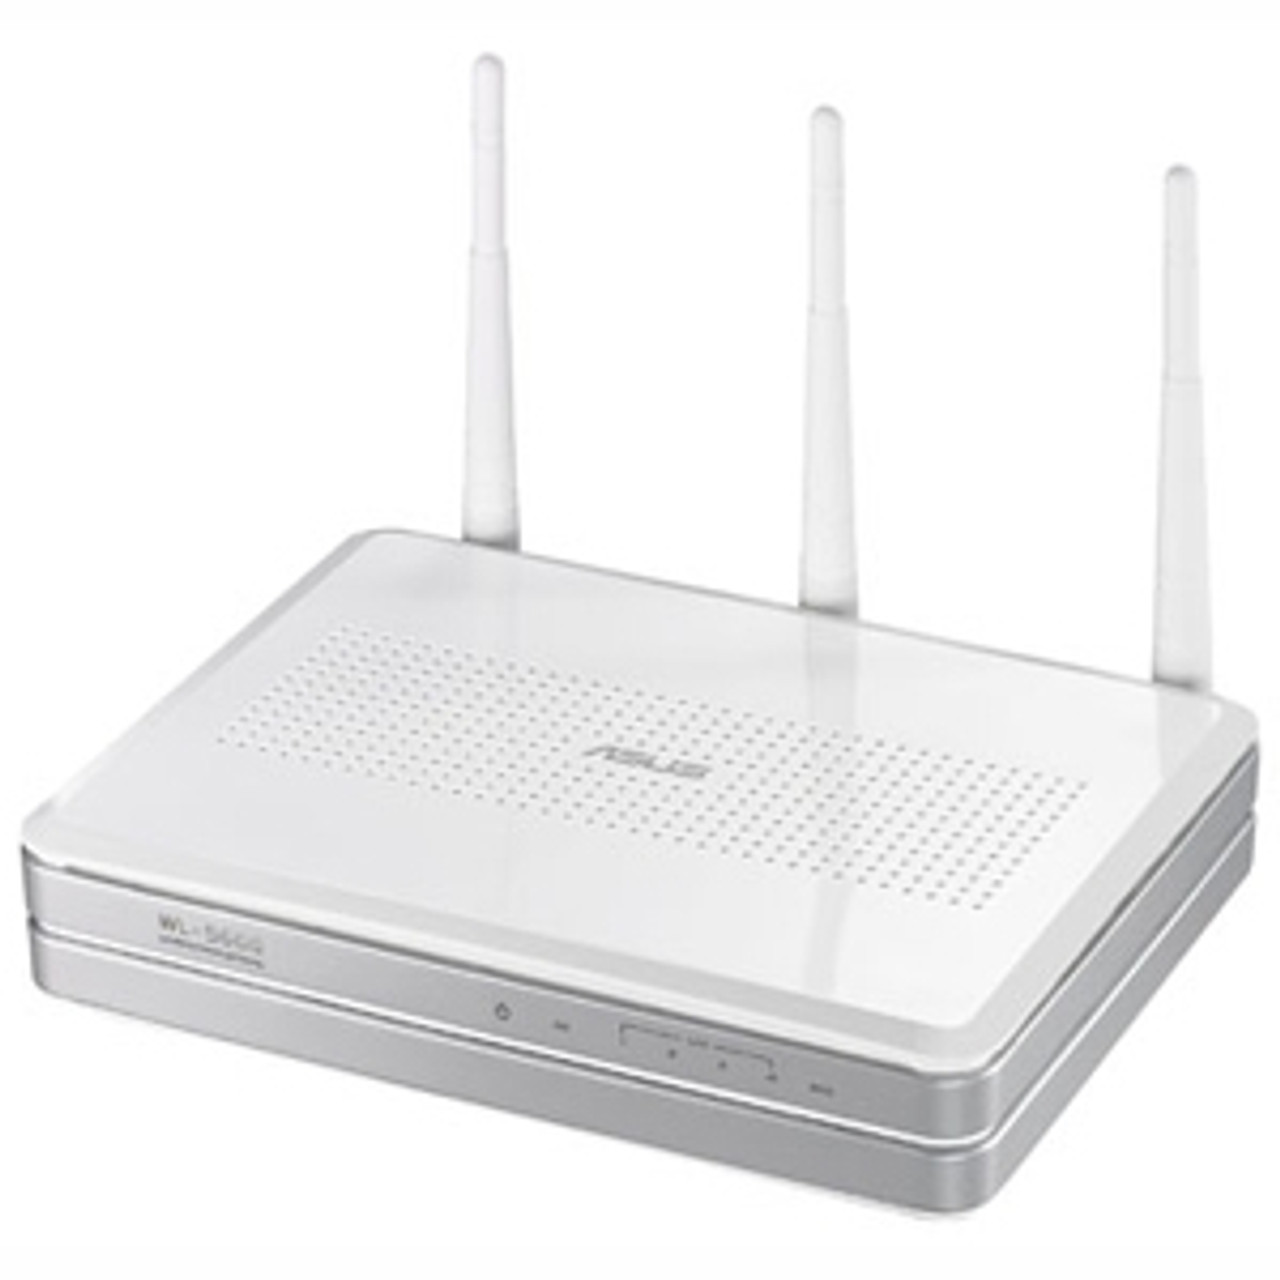 WL-566GM ASUS 240Mbps MIMO Wireless Router (Refurbished)